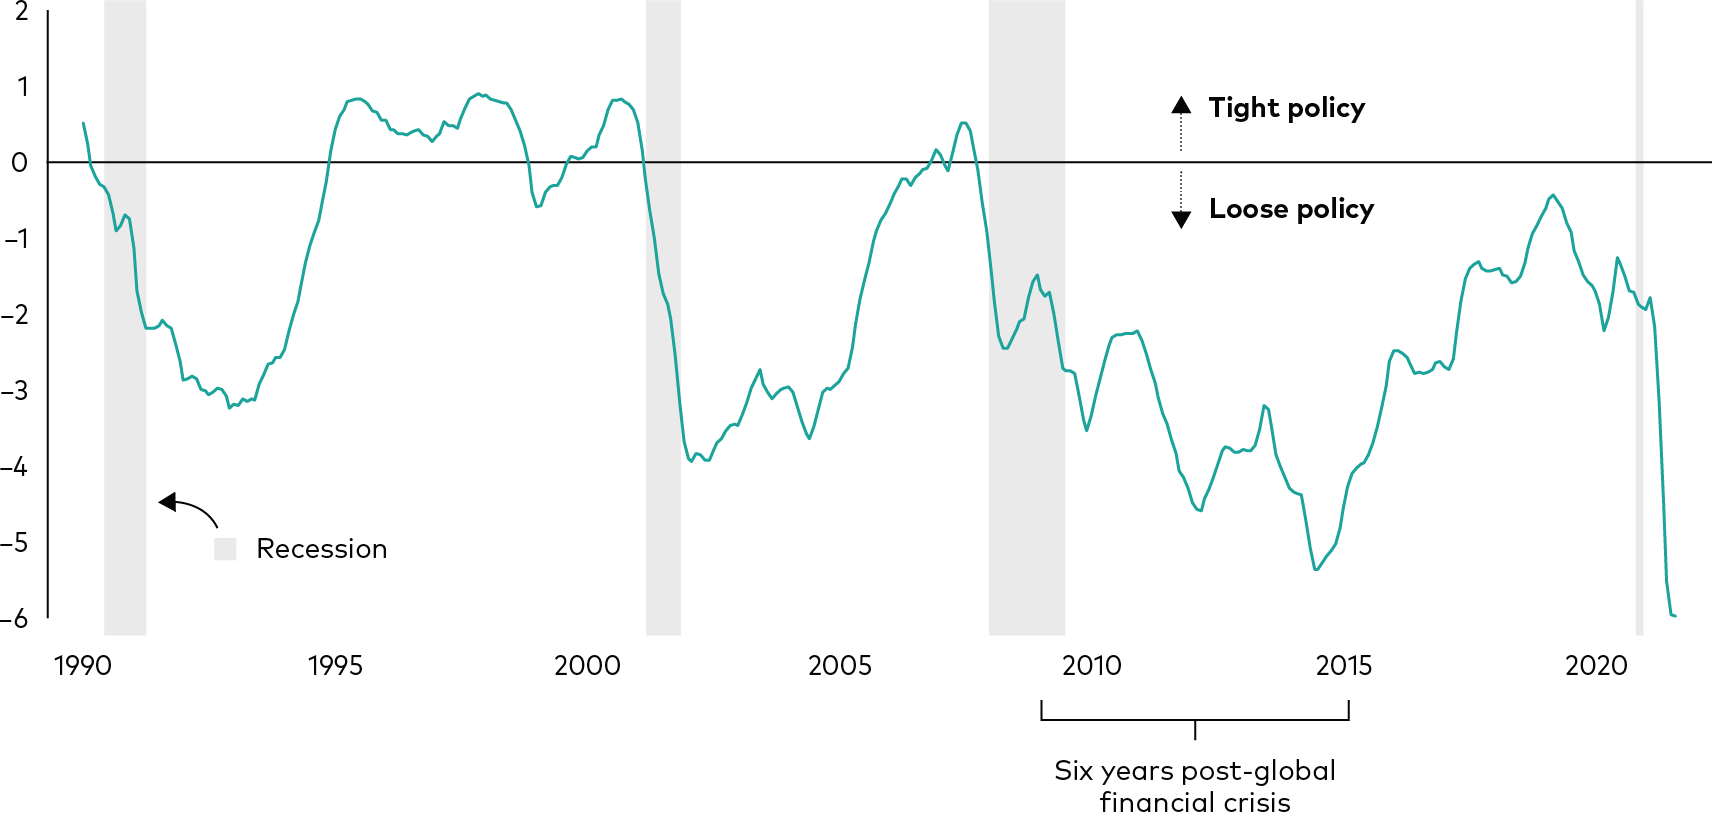 Mixed bar and line chart where the Y-axis represents Monetary policy ratio (ratio goes from -6 to 2 and 0 is the point at which it goes from Loose policy to Tight policy), the X-axis represents years and every fifth year is marked from 1990 until 2020 (a span from 2009-2015 is marked as the Six years post-global financial crisis). Bars represents Recessions and the line shows how the Monetary policy ratio has moved, especially how there has been a significant drop preceding every recession and how it is now lower than it has ever been.